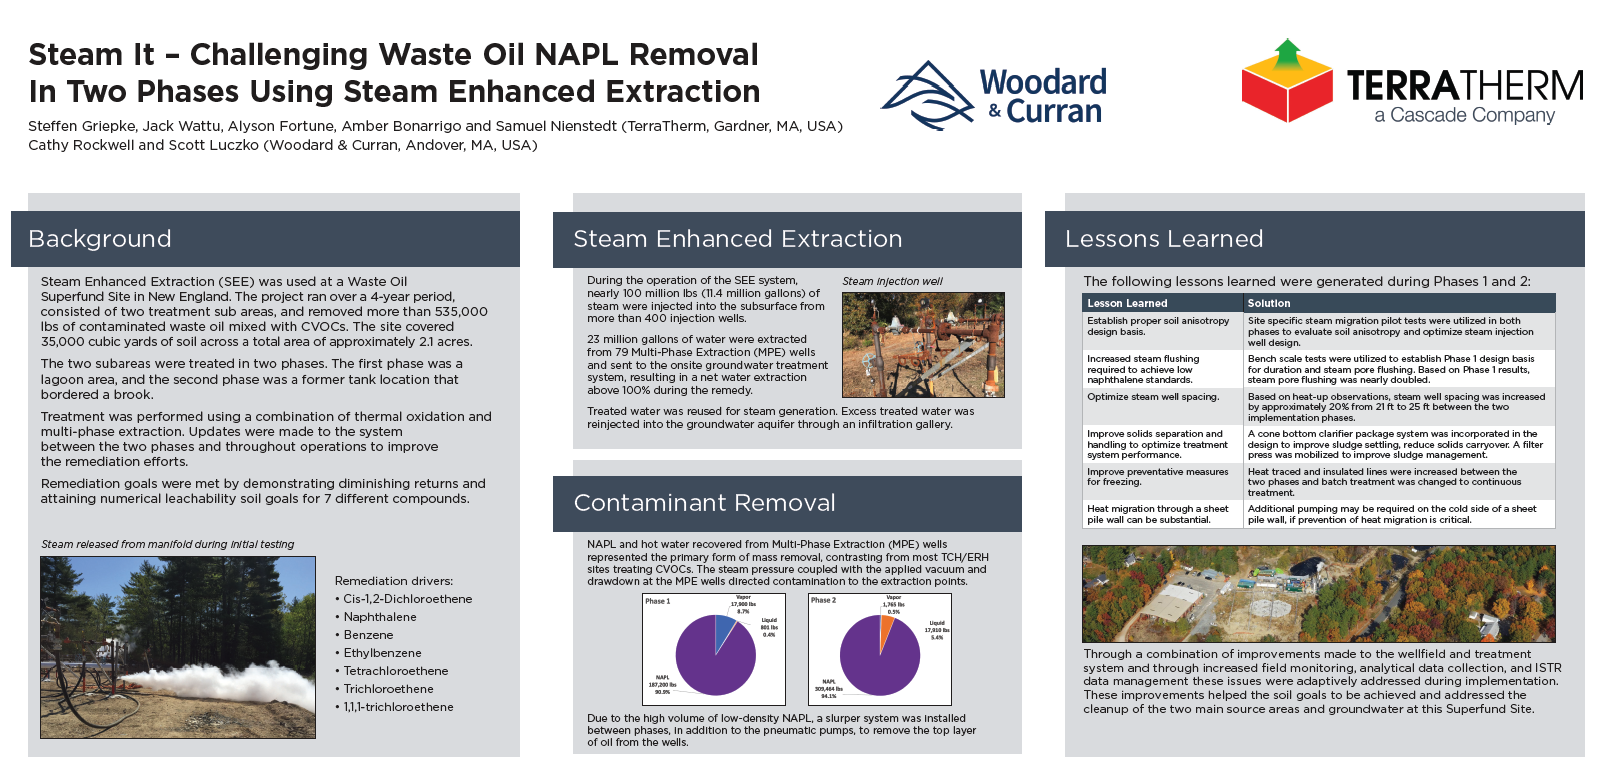 Steam It - Challenging Waste Oil NAPL Removal in Two Phases using Steam Enhanced Extraction